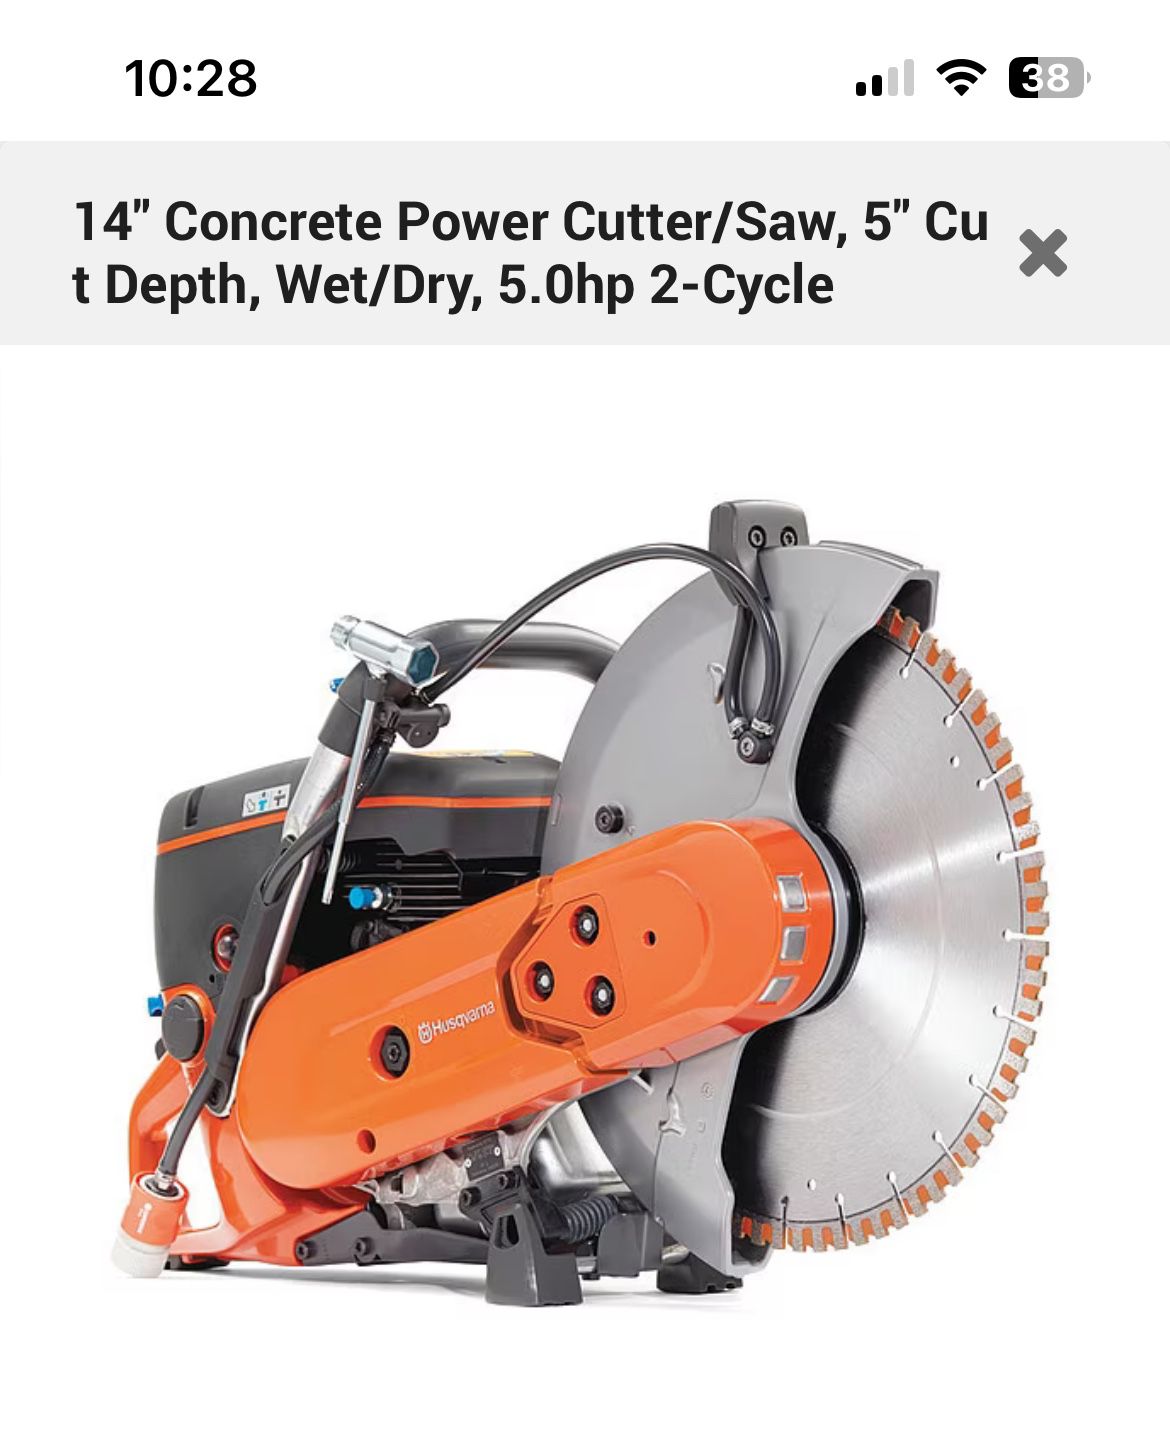 Gas powered concrete cutter 14 inch